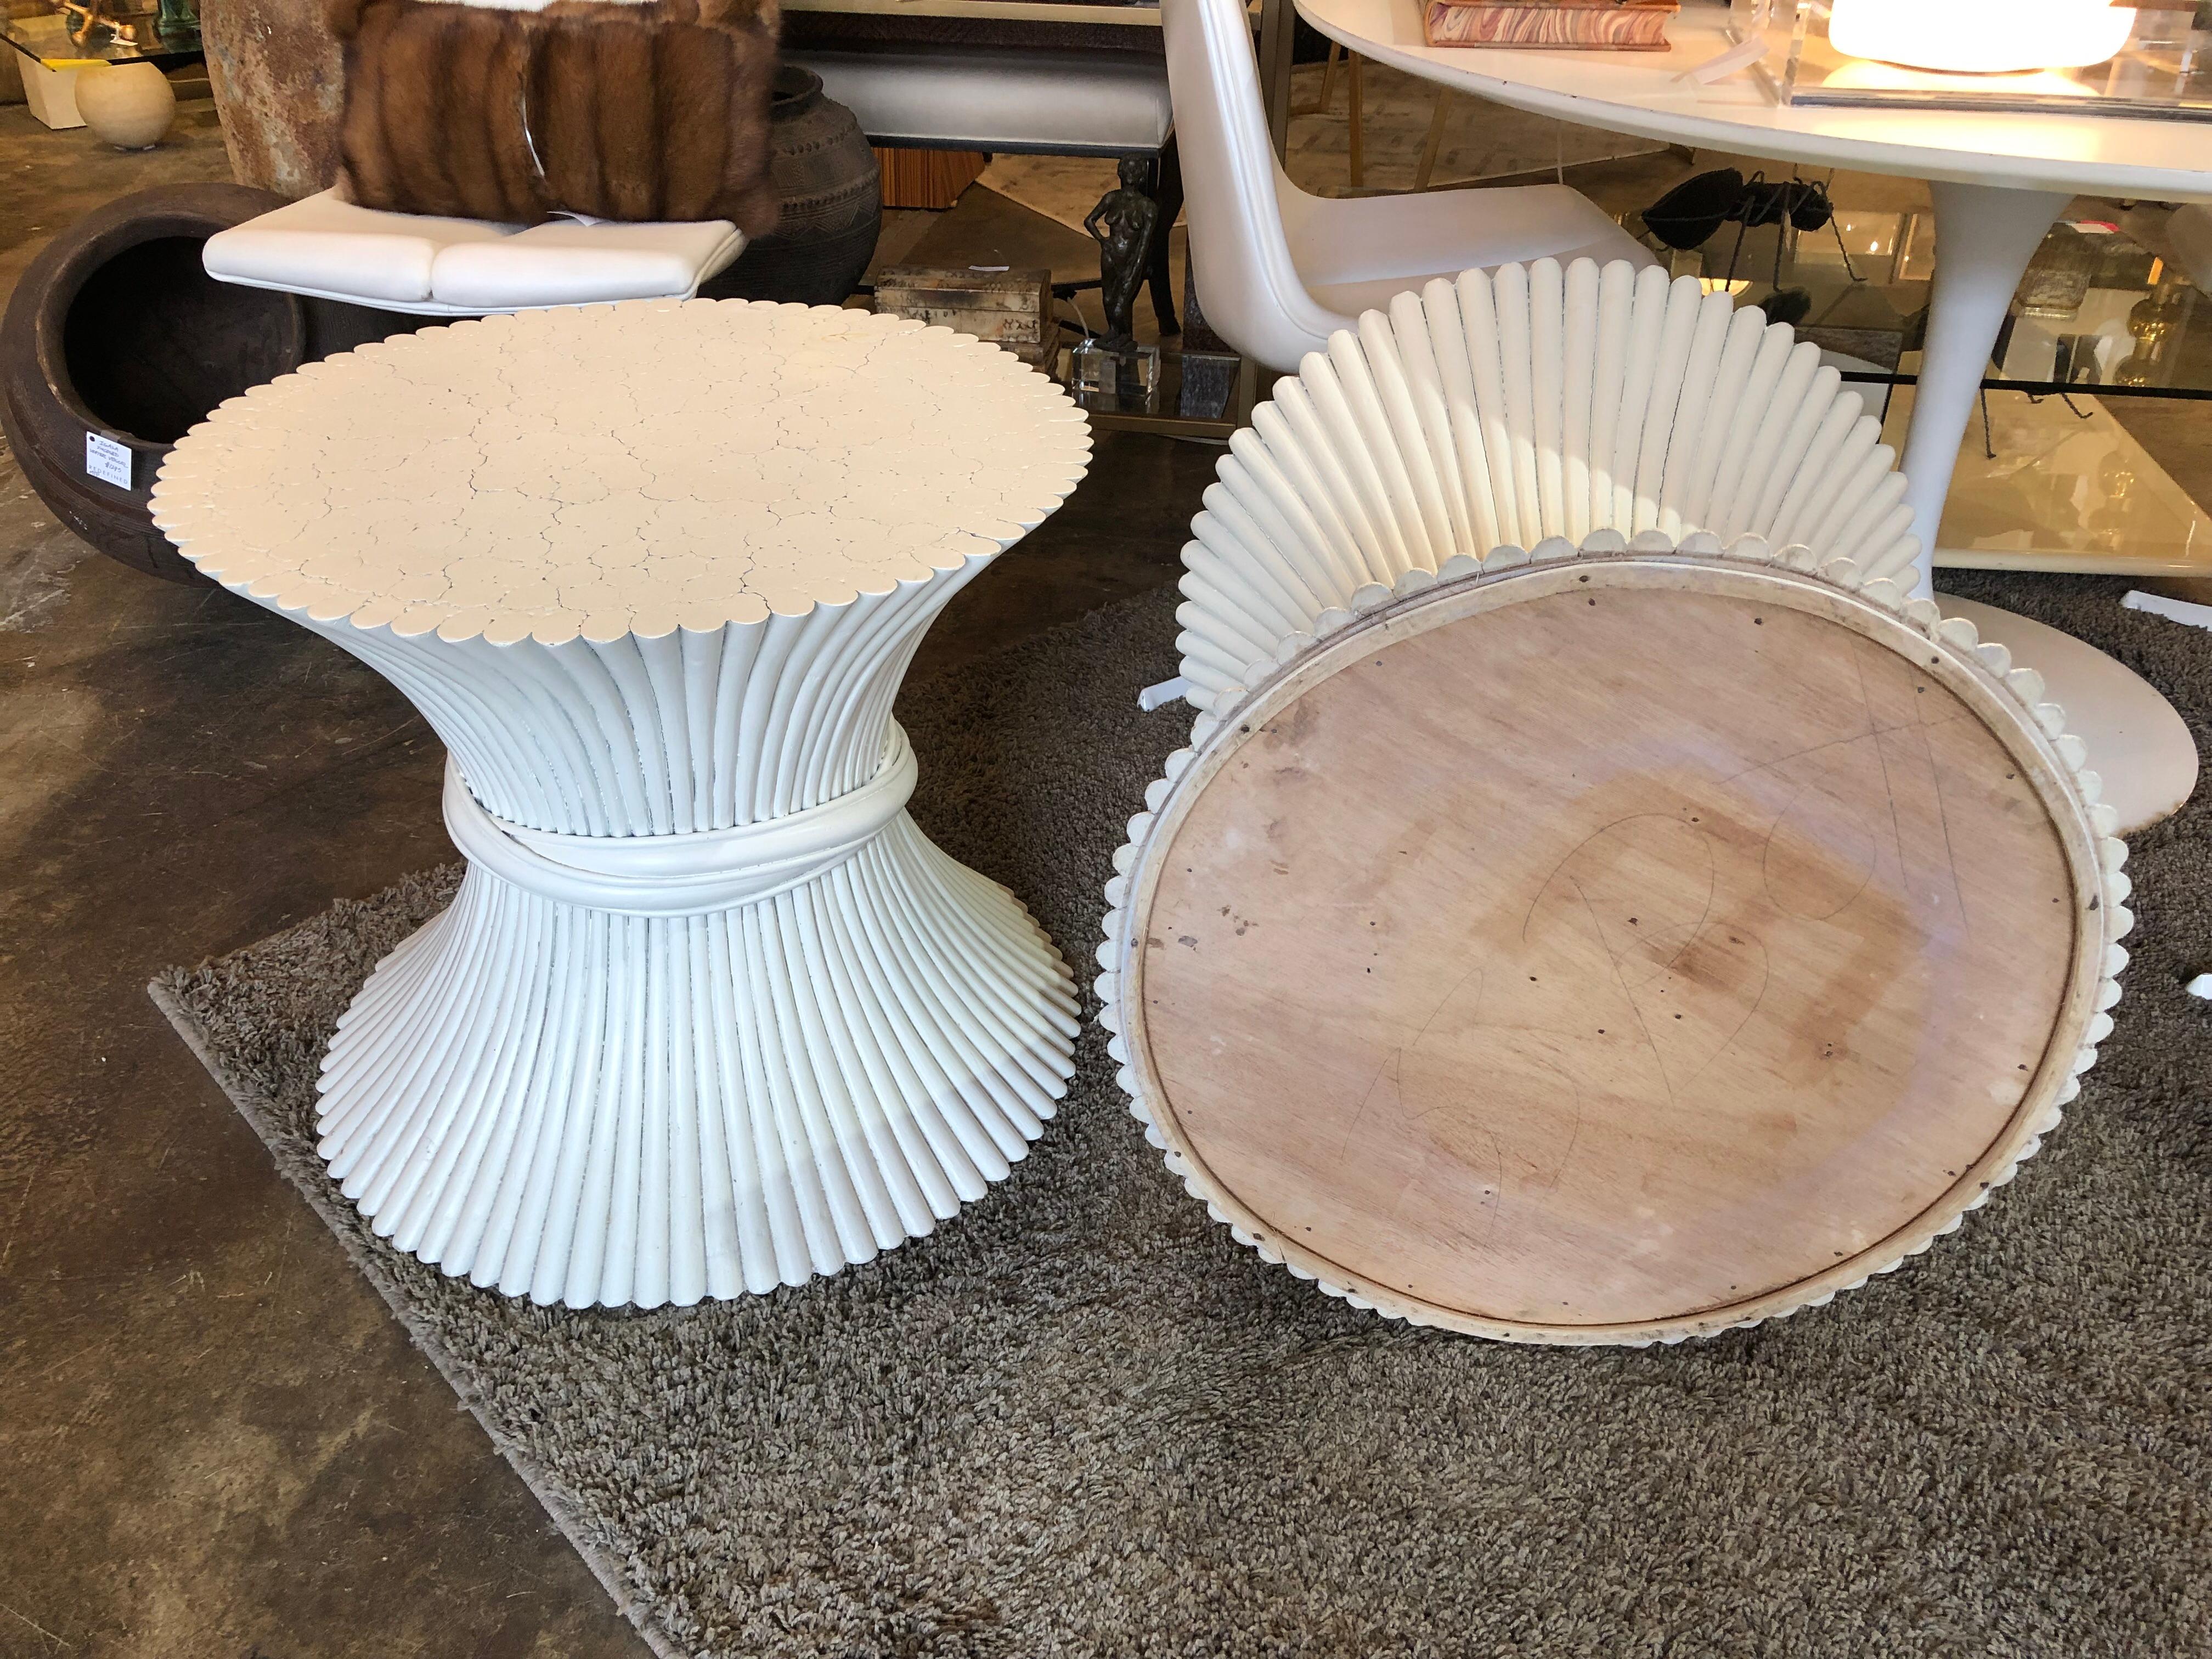 A pair of late 1970s sheaf of wheat side tables by McGuire painted white.